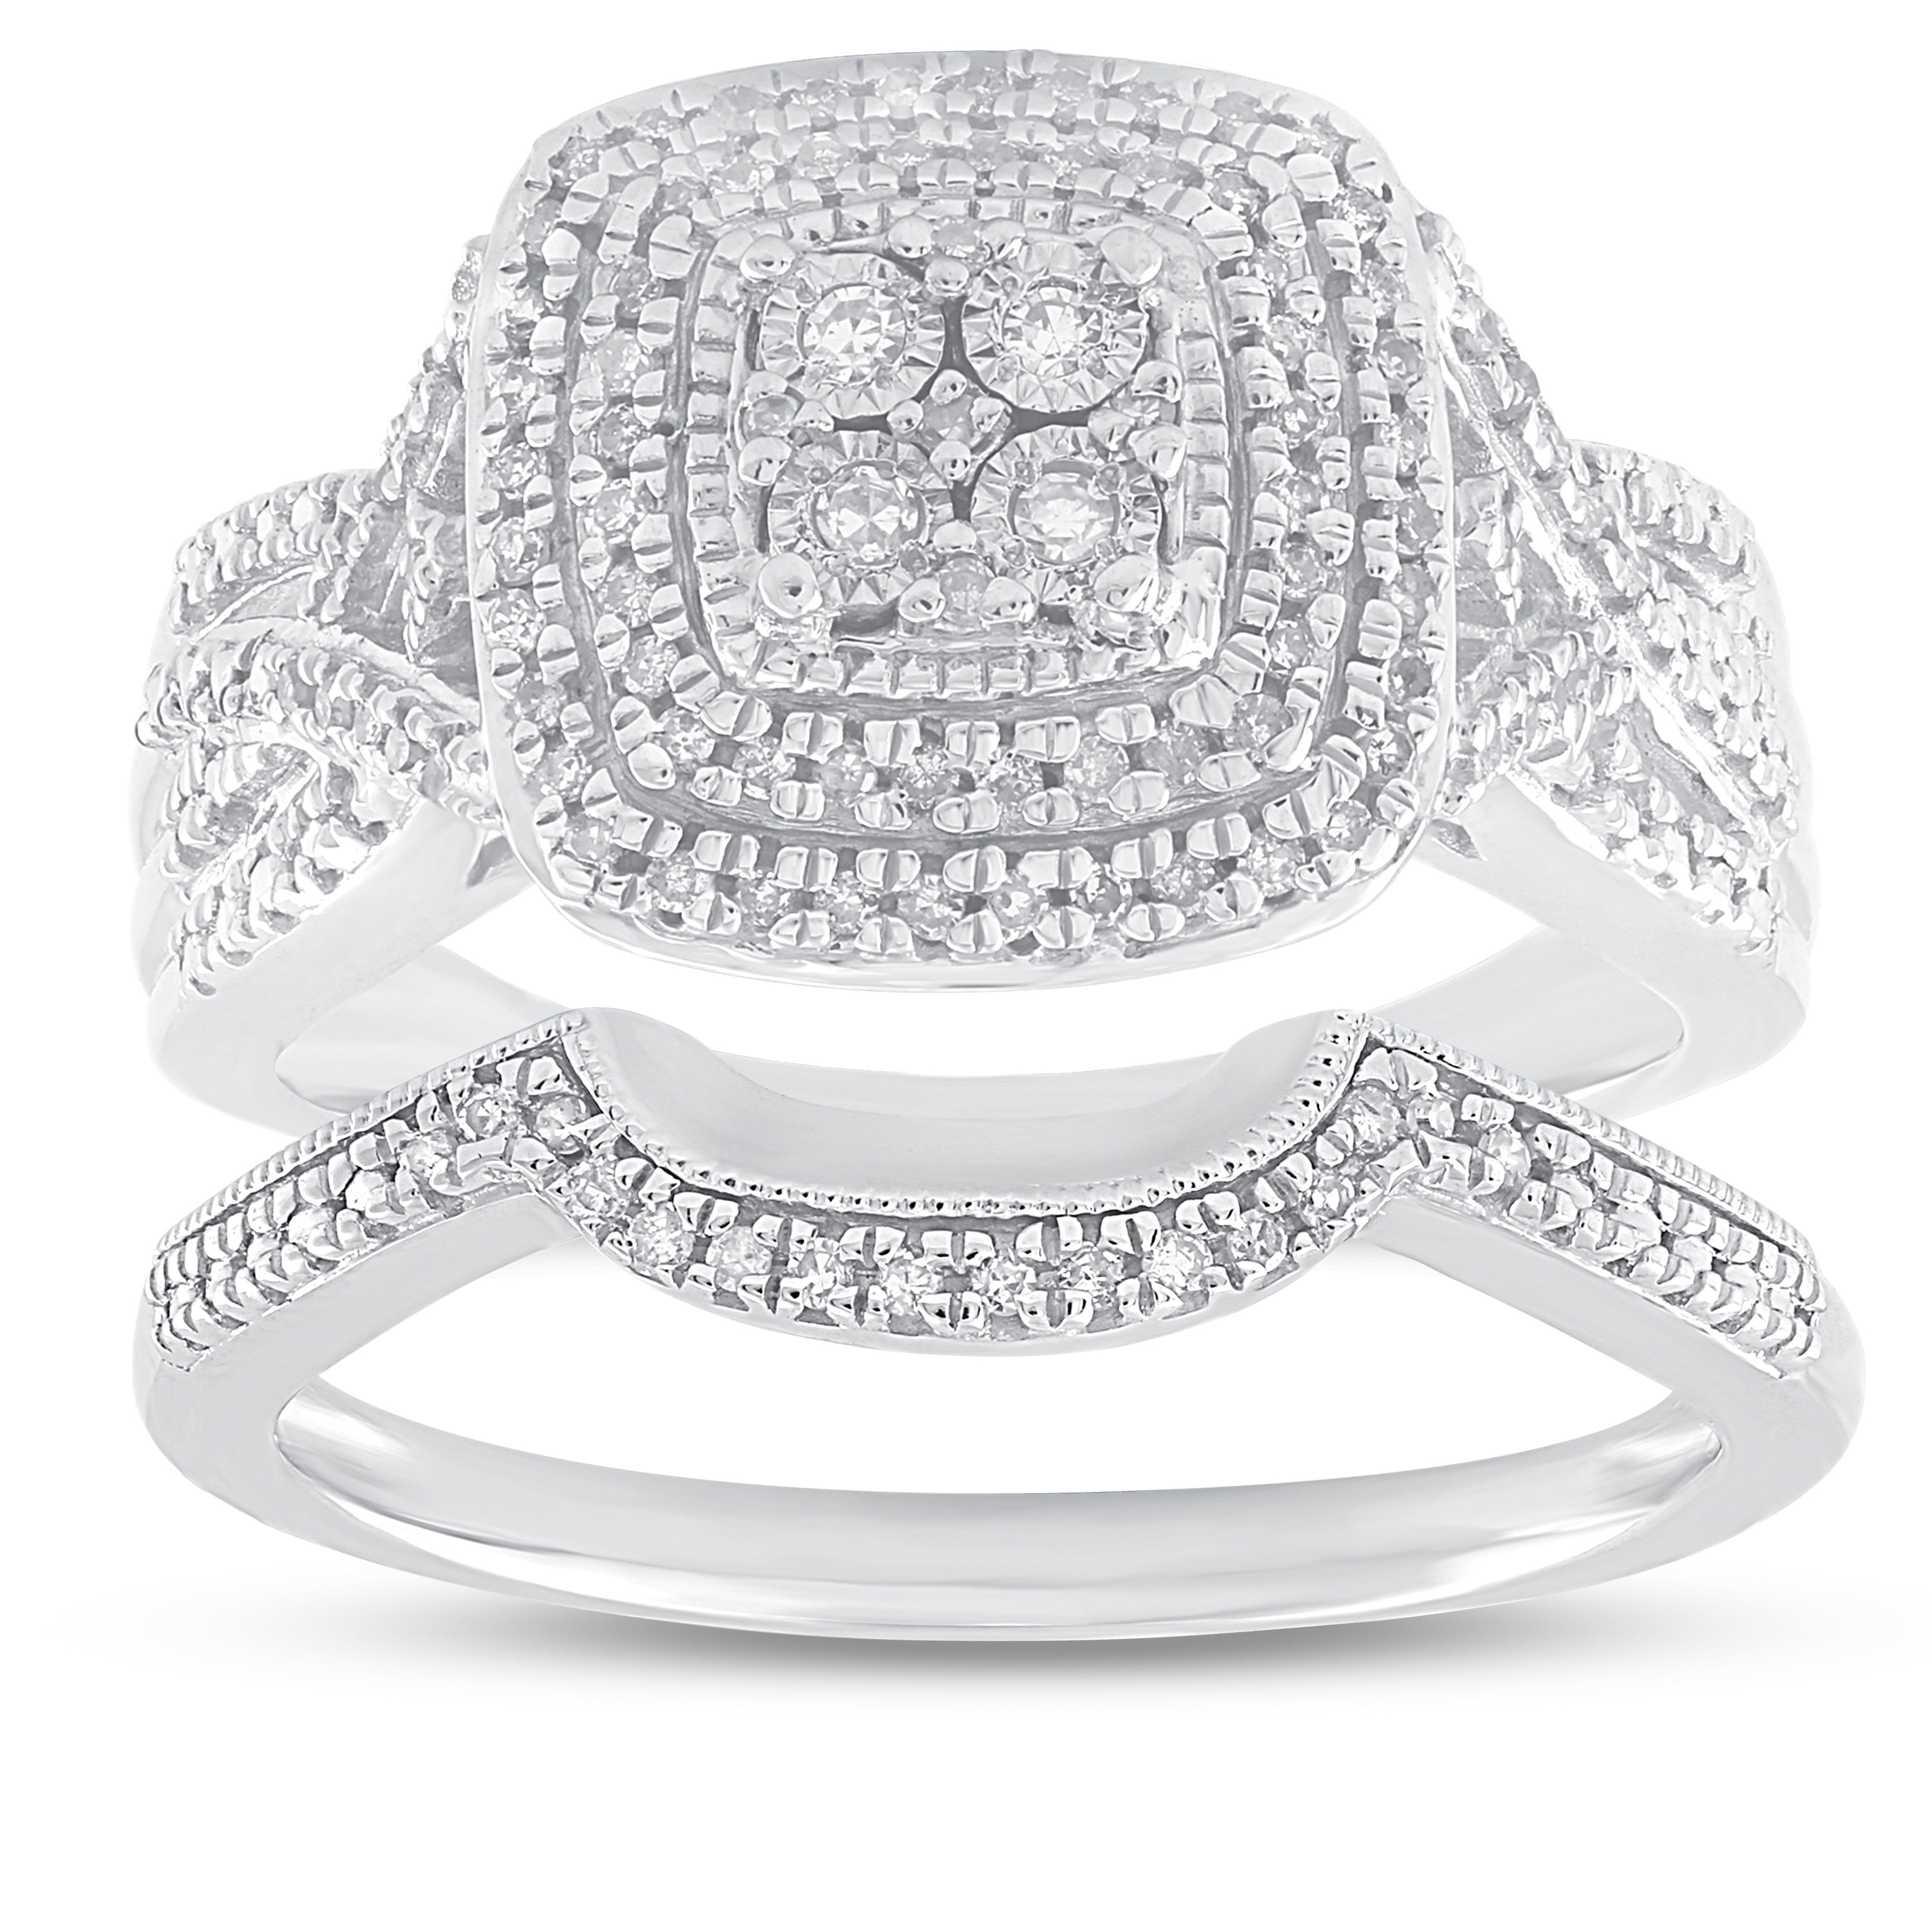 Forever Bride Sterling Silver 1/3 CTTW Diamond Cushion Bridal Ring Set, Women, Adults